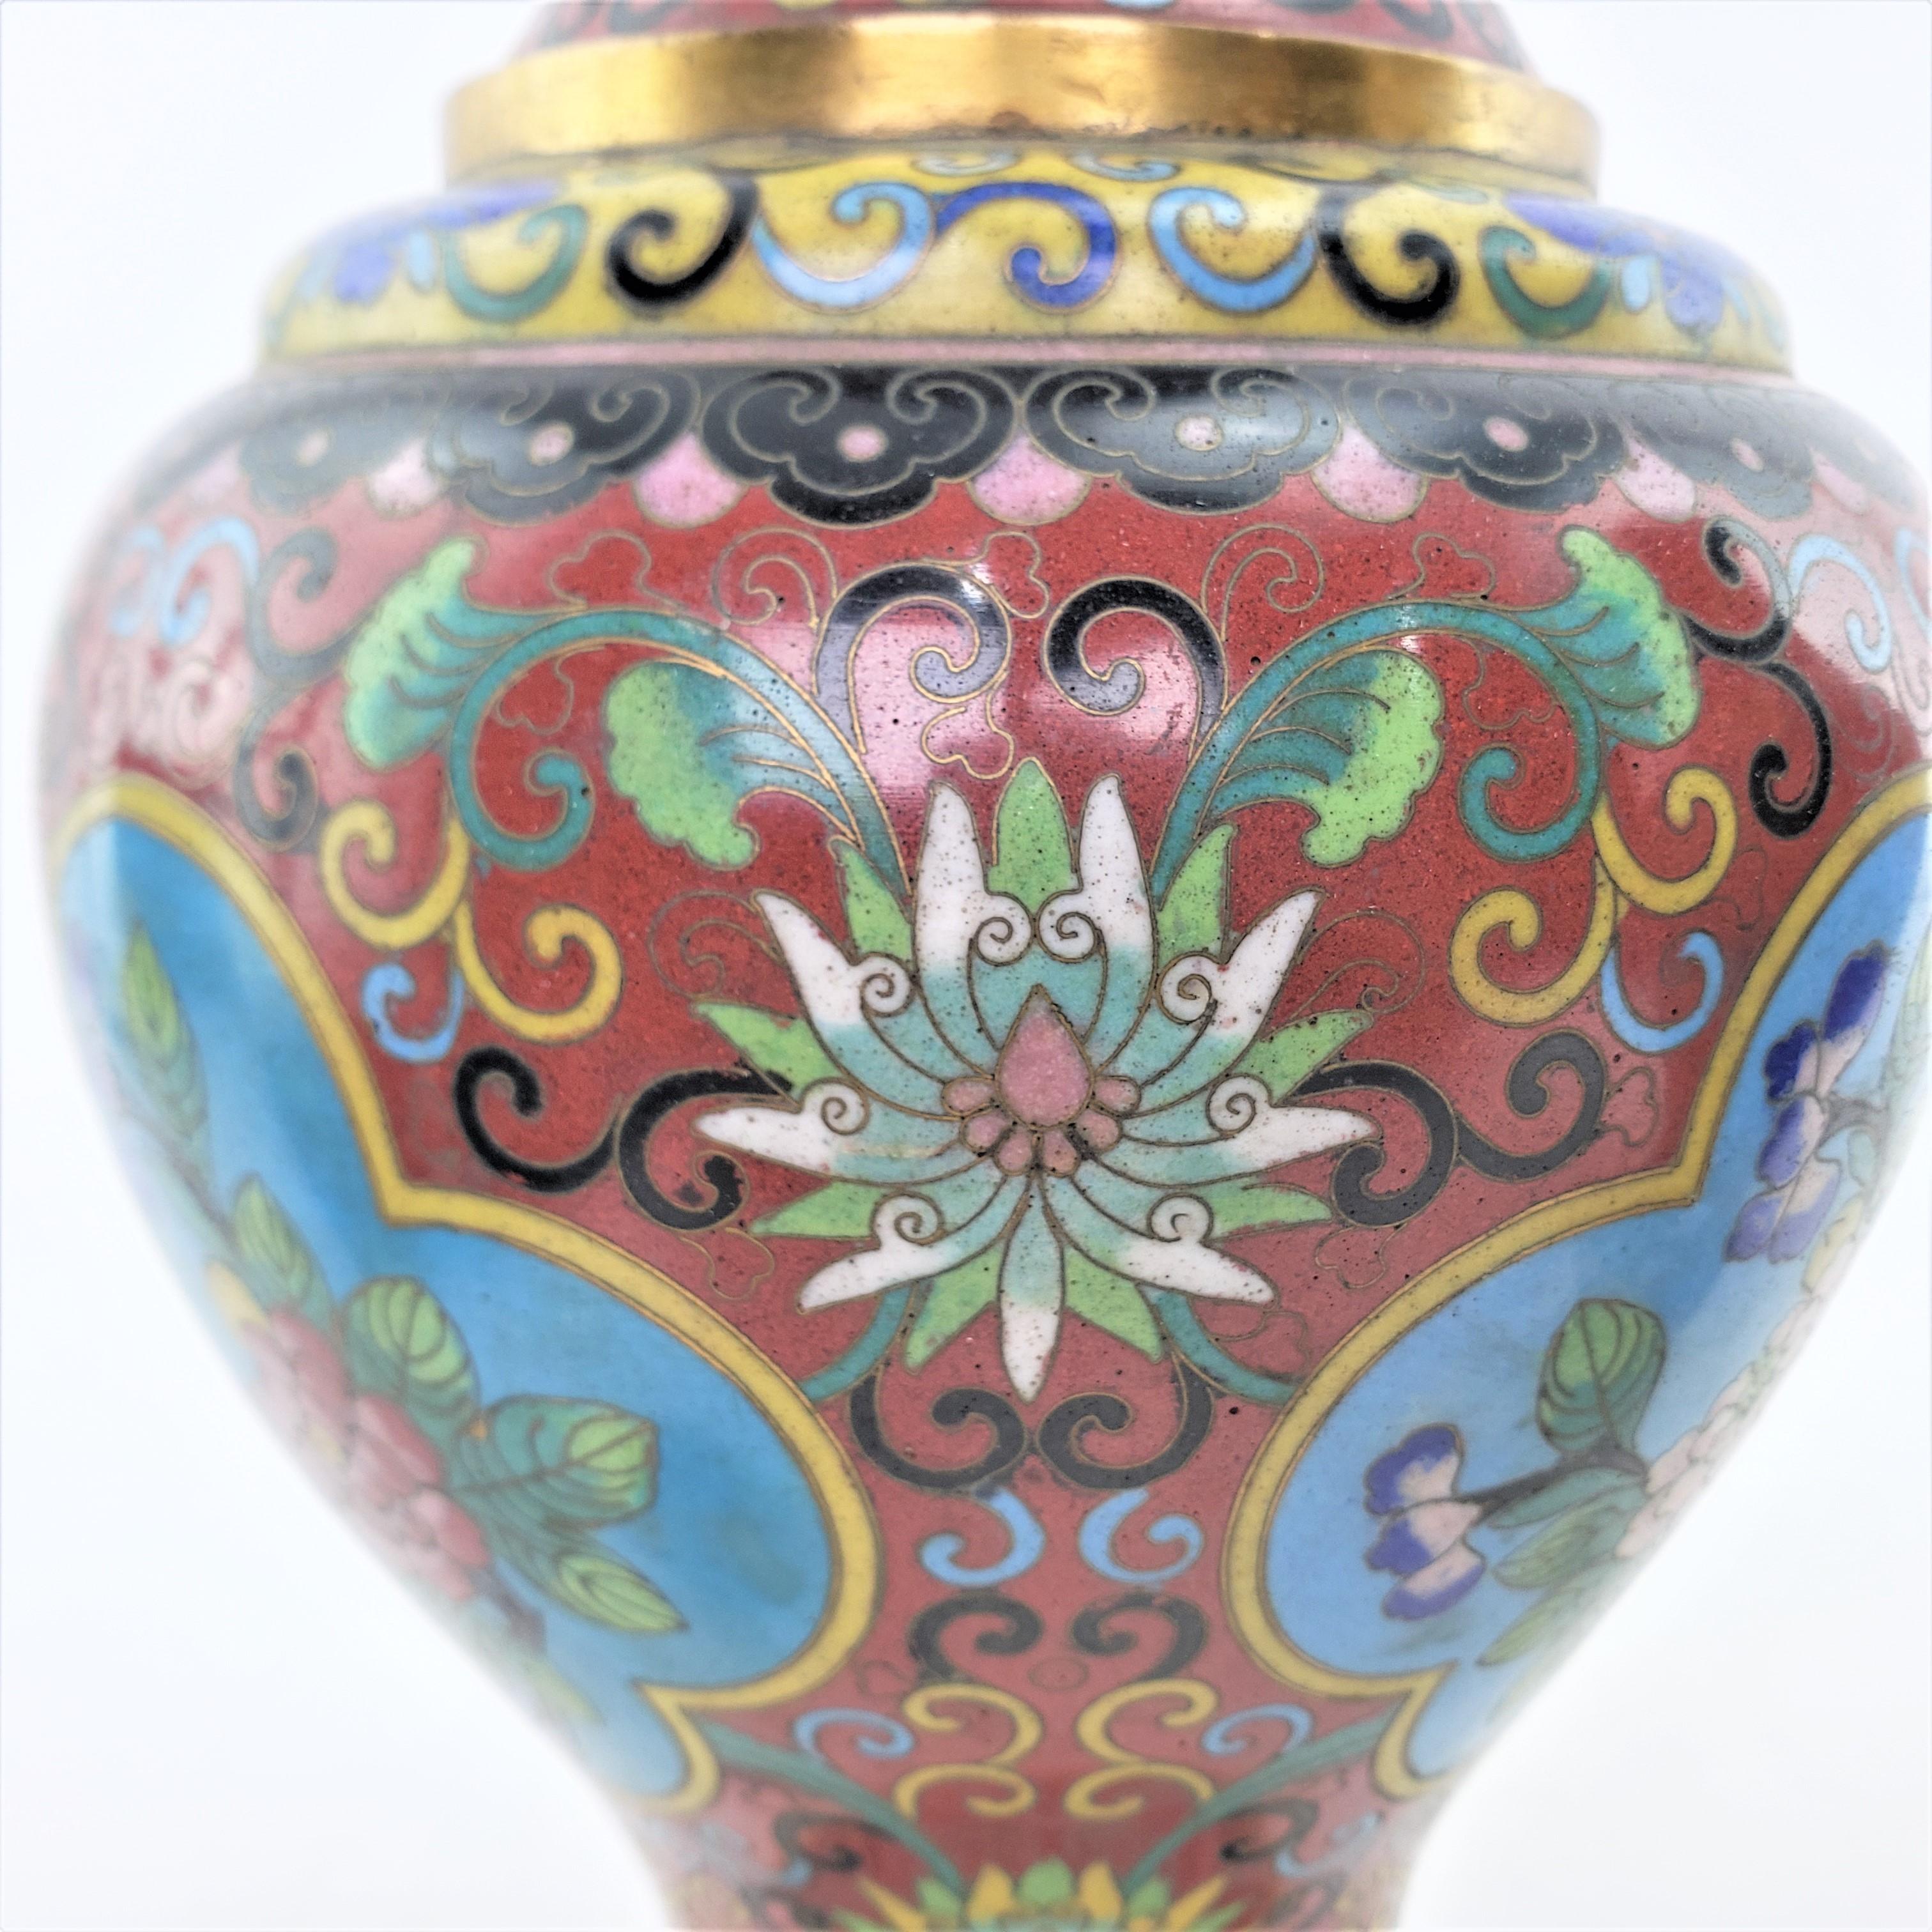 Pair of Early Chinese Republic Era Cloisonne Vases with Stylized Floral Motif For Sale 9